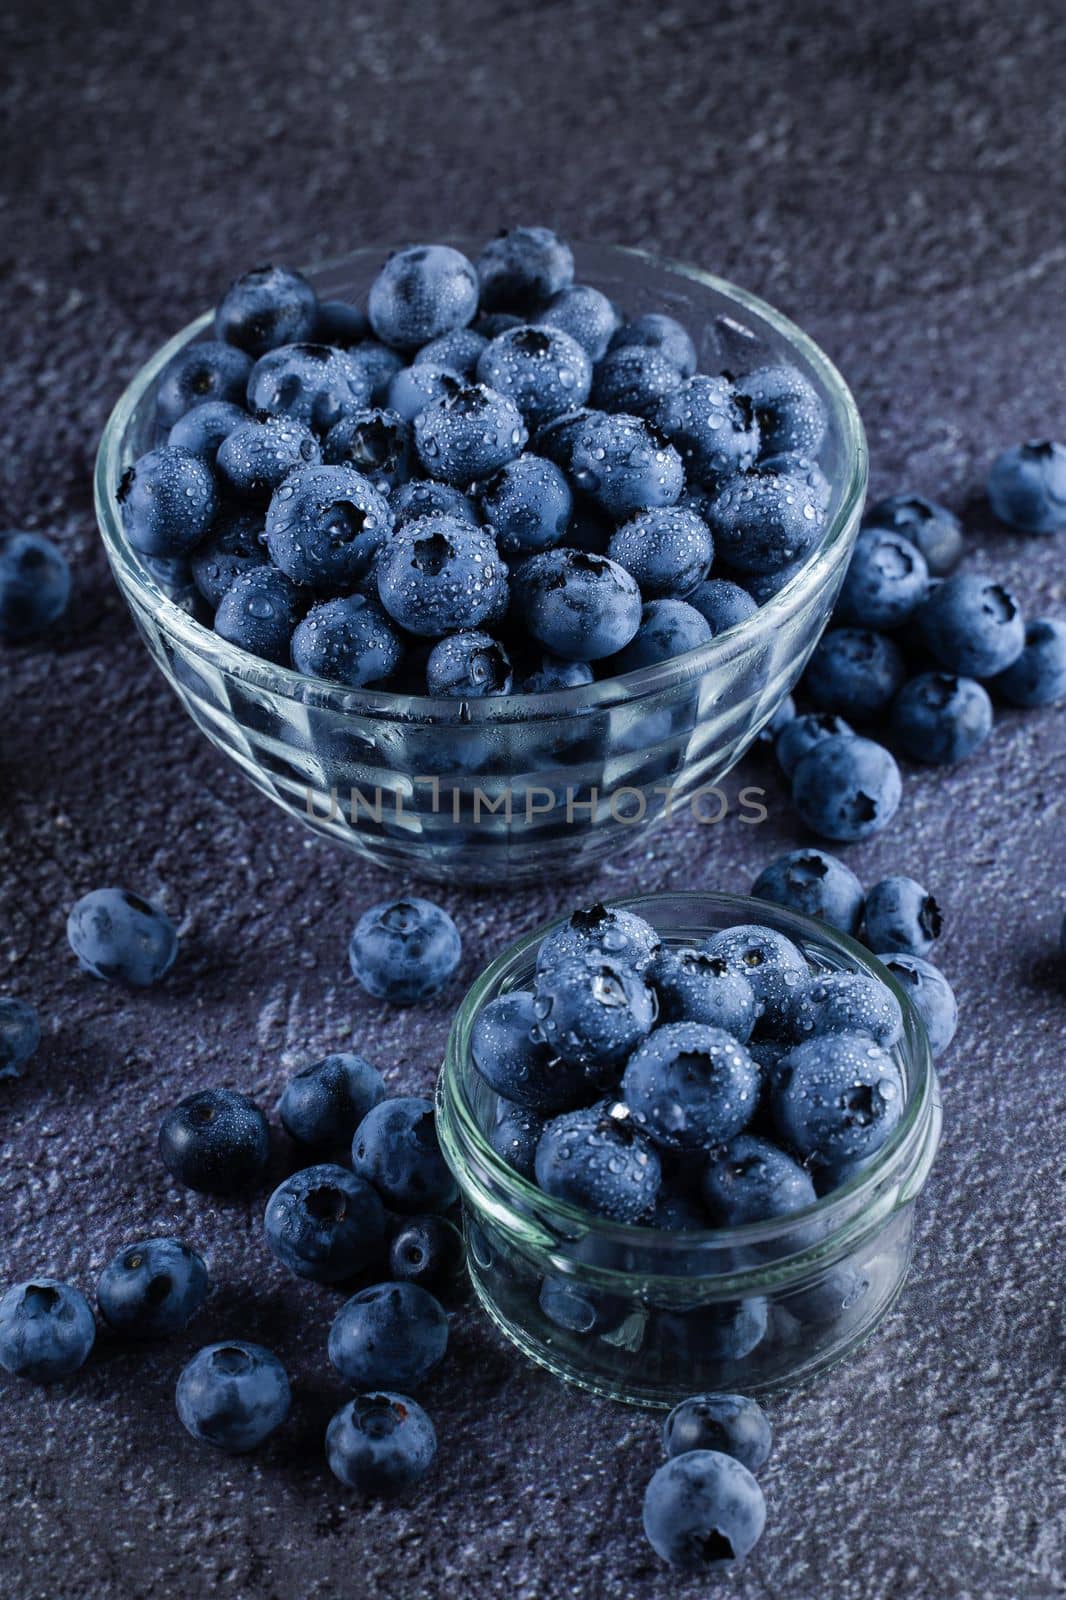 Blueberries organic natural berry with water drops on dark background. Blueberry in glass bowl plate